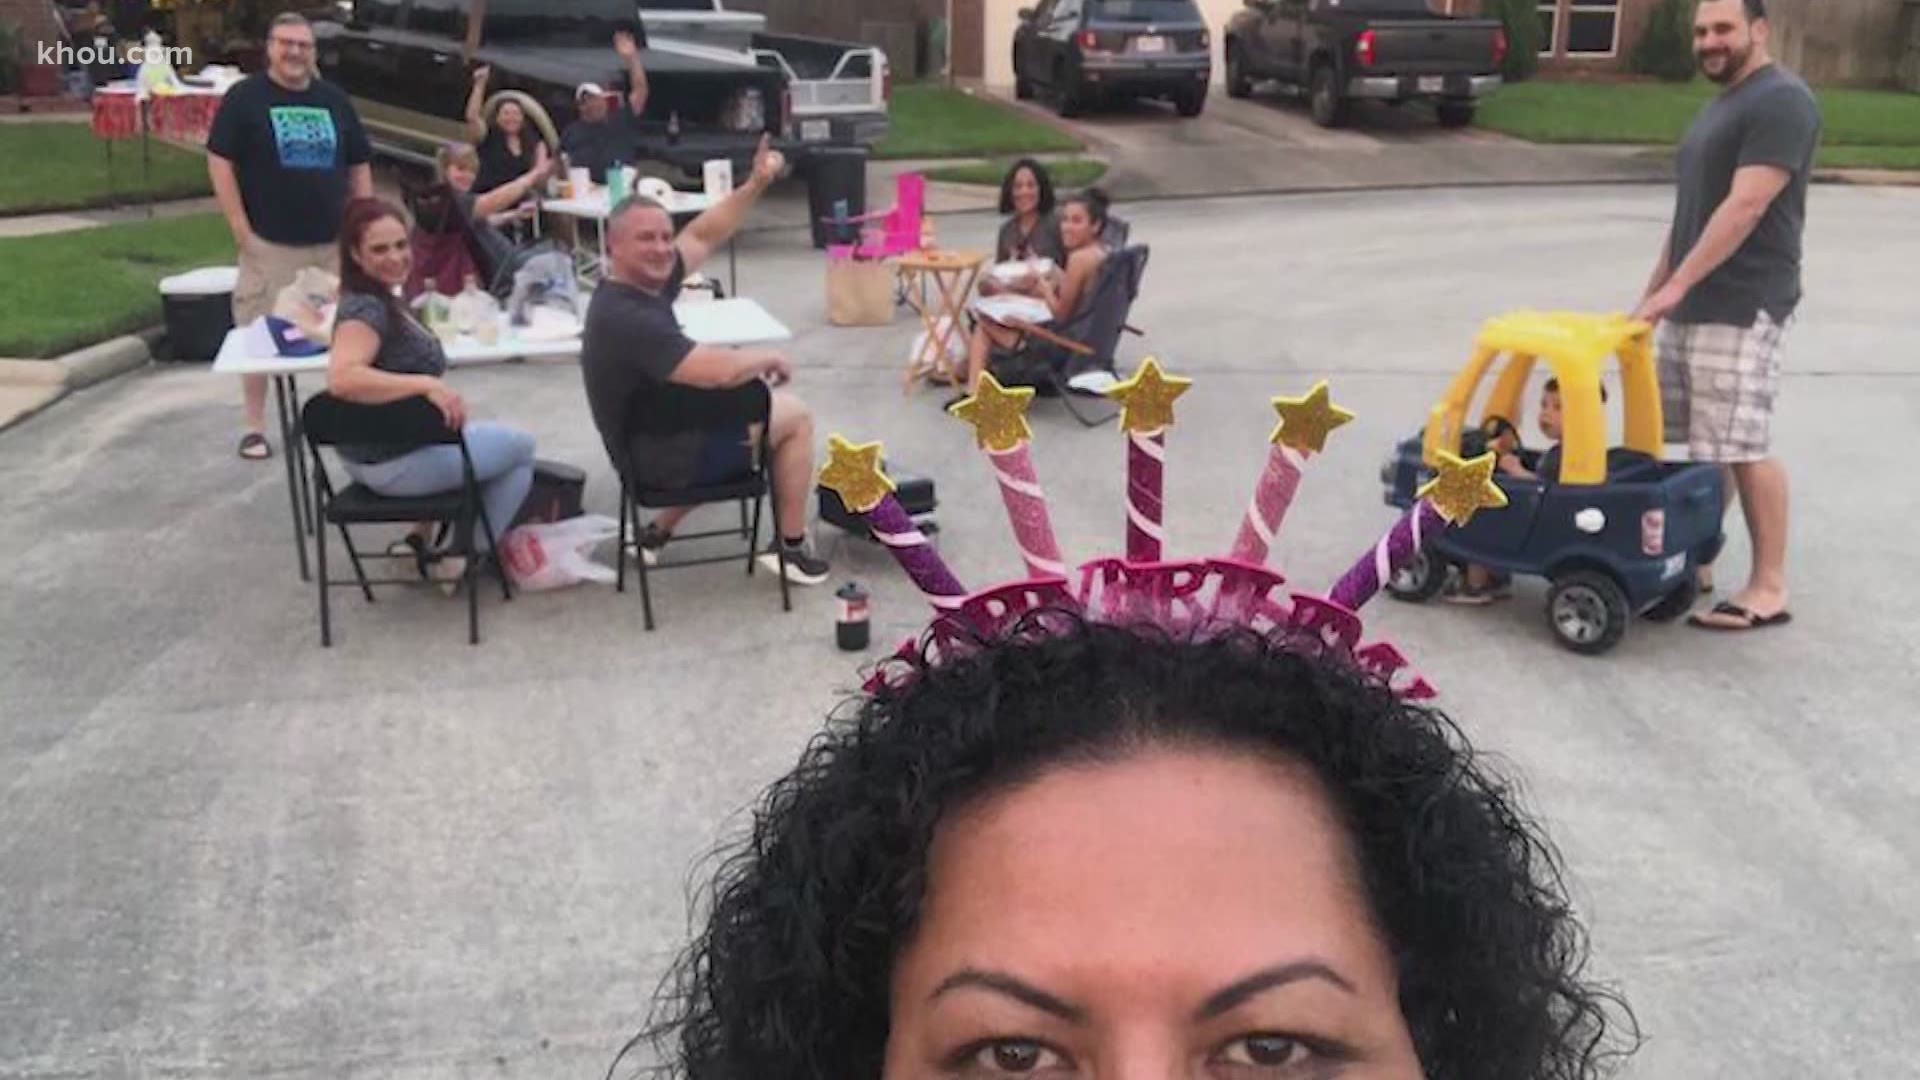 Houston is resilient. If there's a will to celebrate birthdays, anniversaries and milestones, this city will figure out a way to make it happen. Cue the car parade!